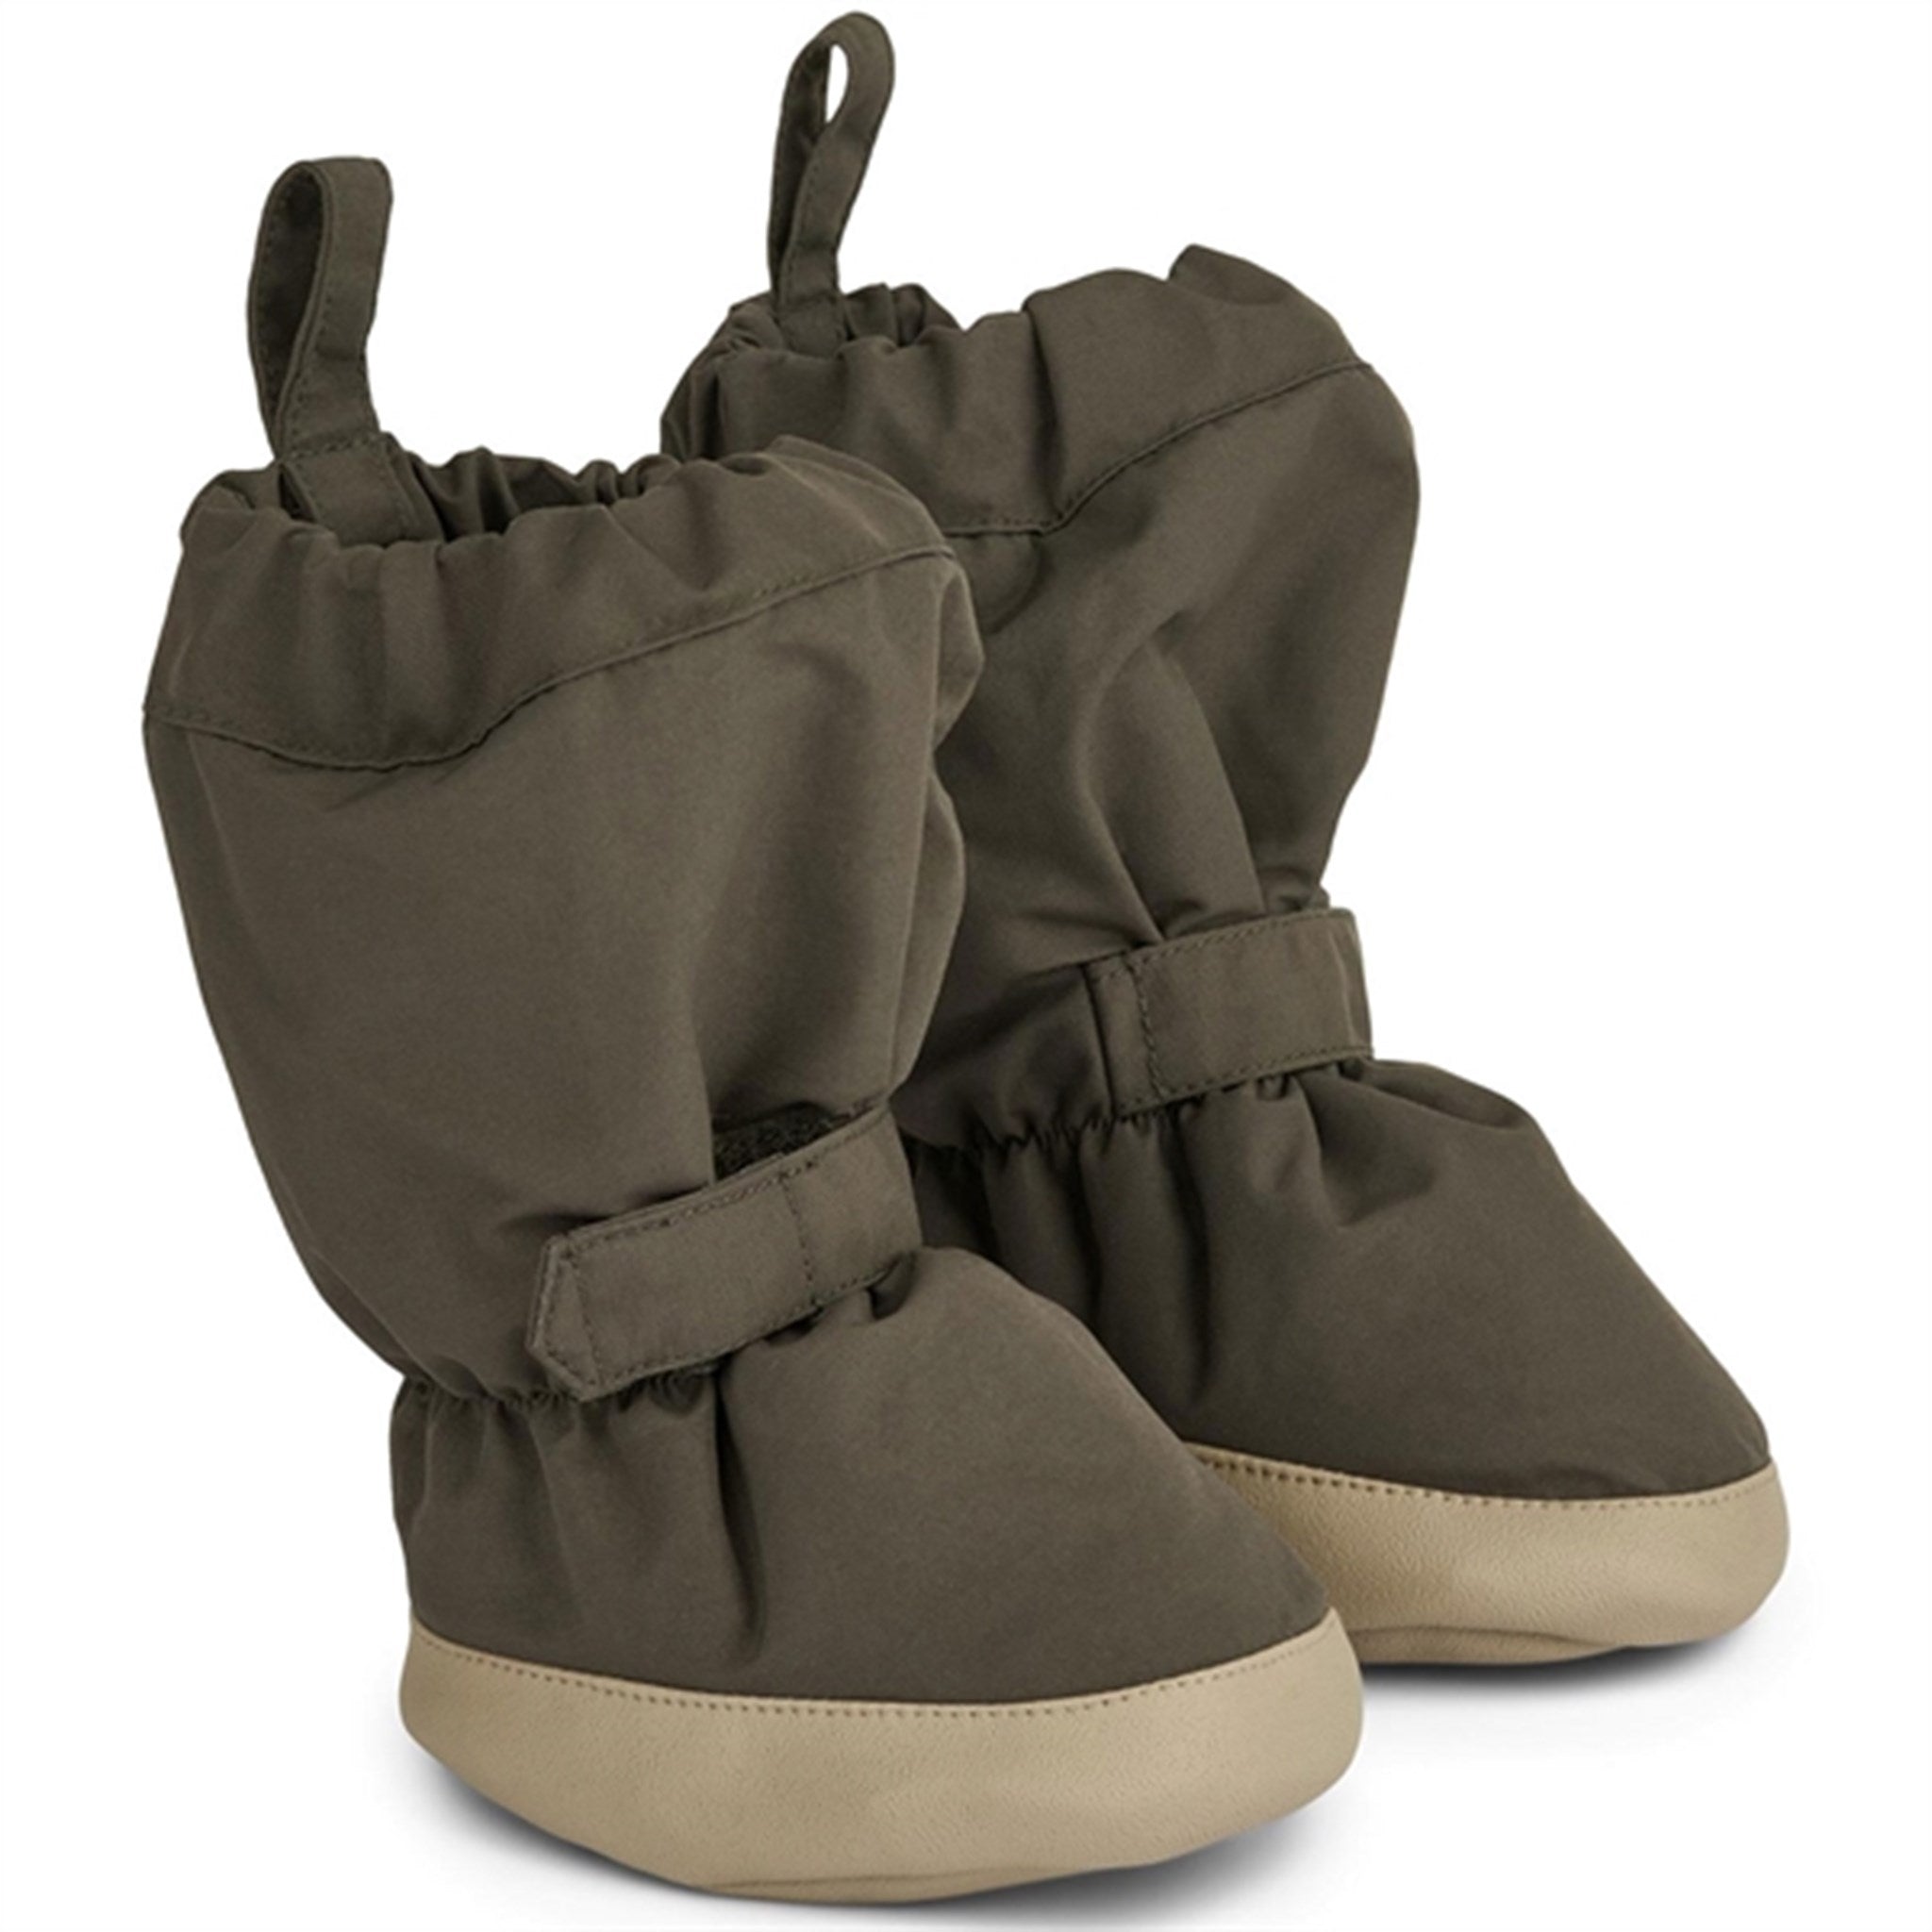 Wheat Outerwear Booties Tech Dry Black